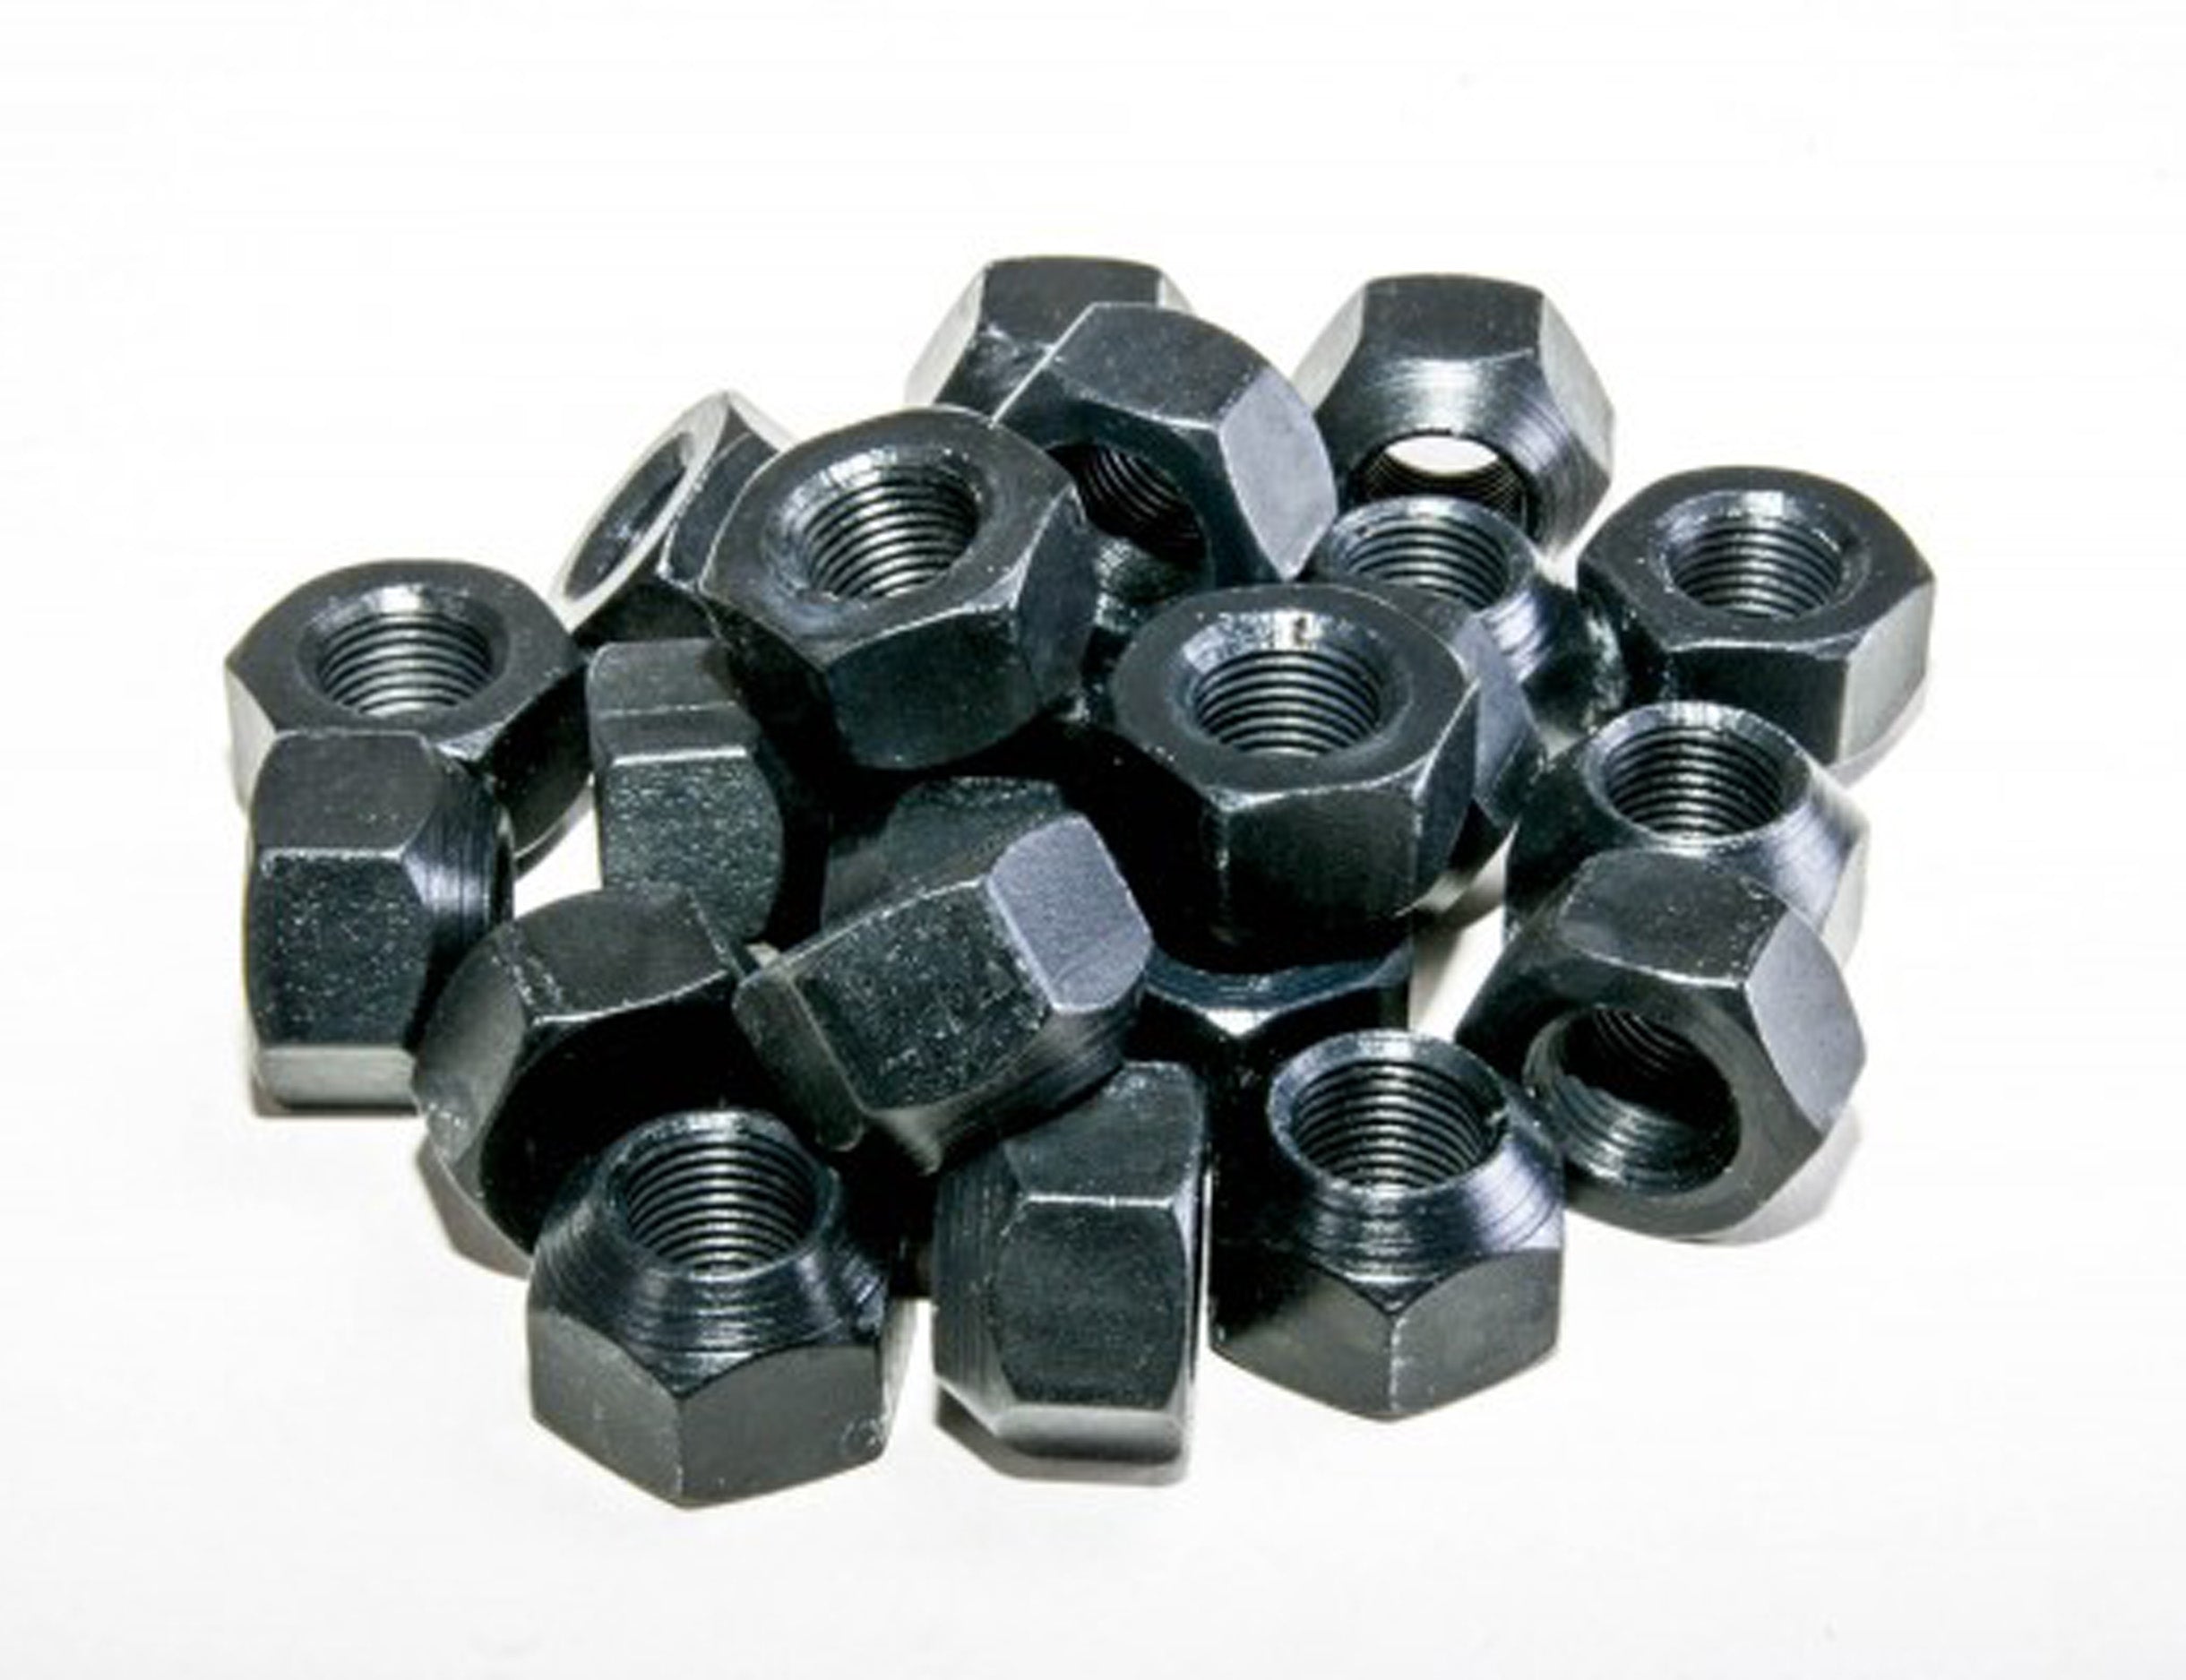 Lug Nut Set (23 pieces) galvanized & black passivate plated - for Land Rover Defender & late-Series